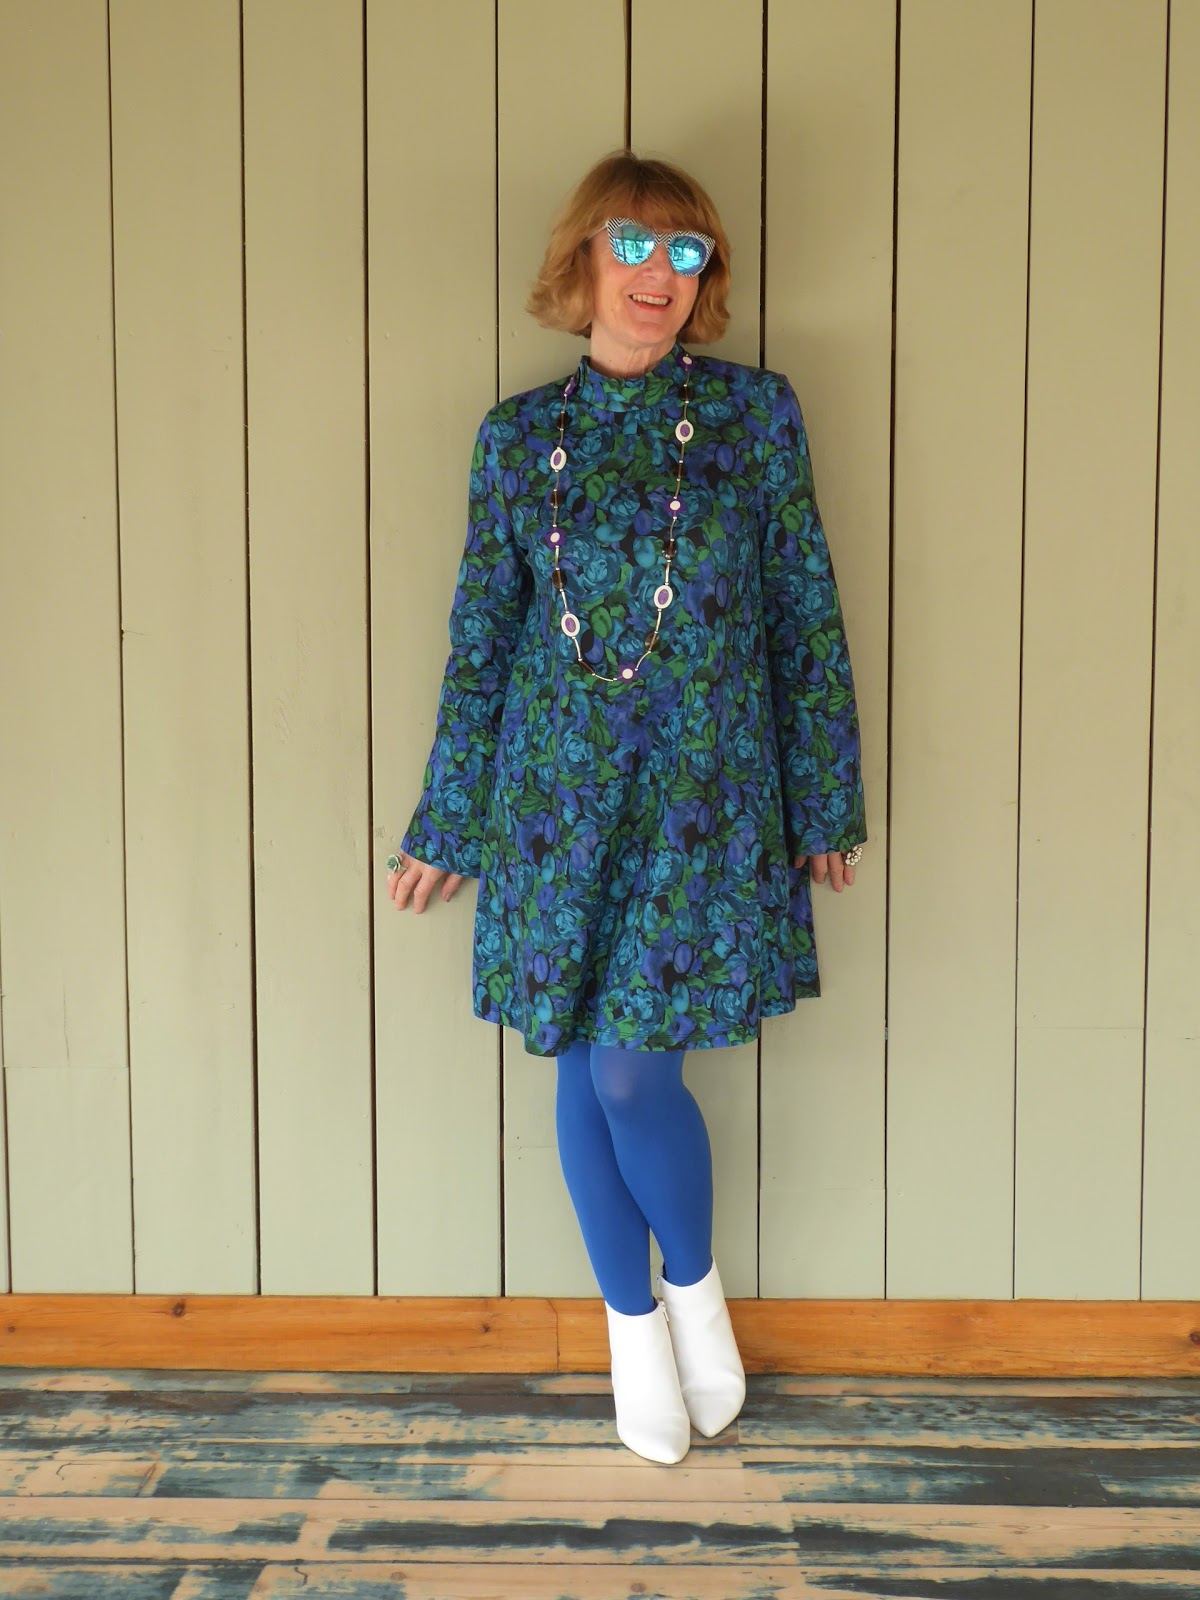 Flower Power - February's style challenge | Anna's Island Style